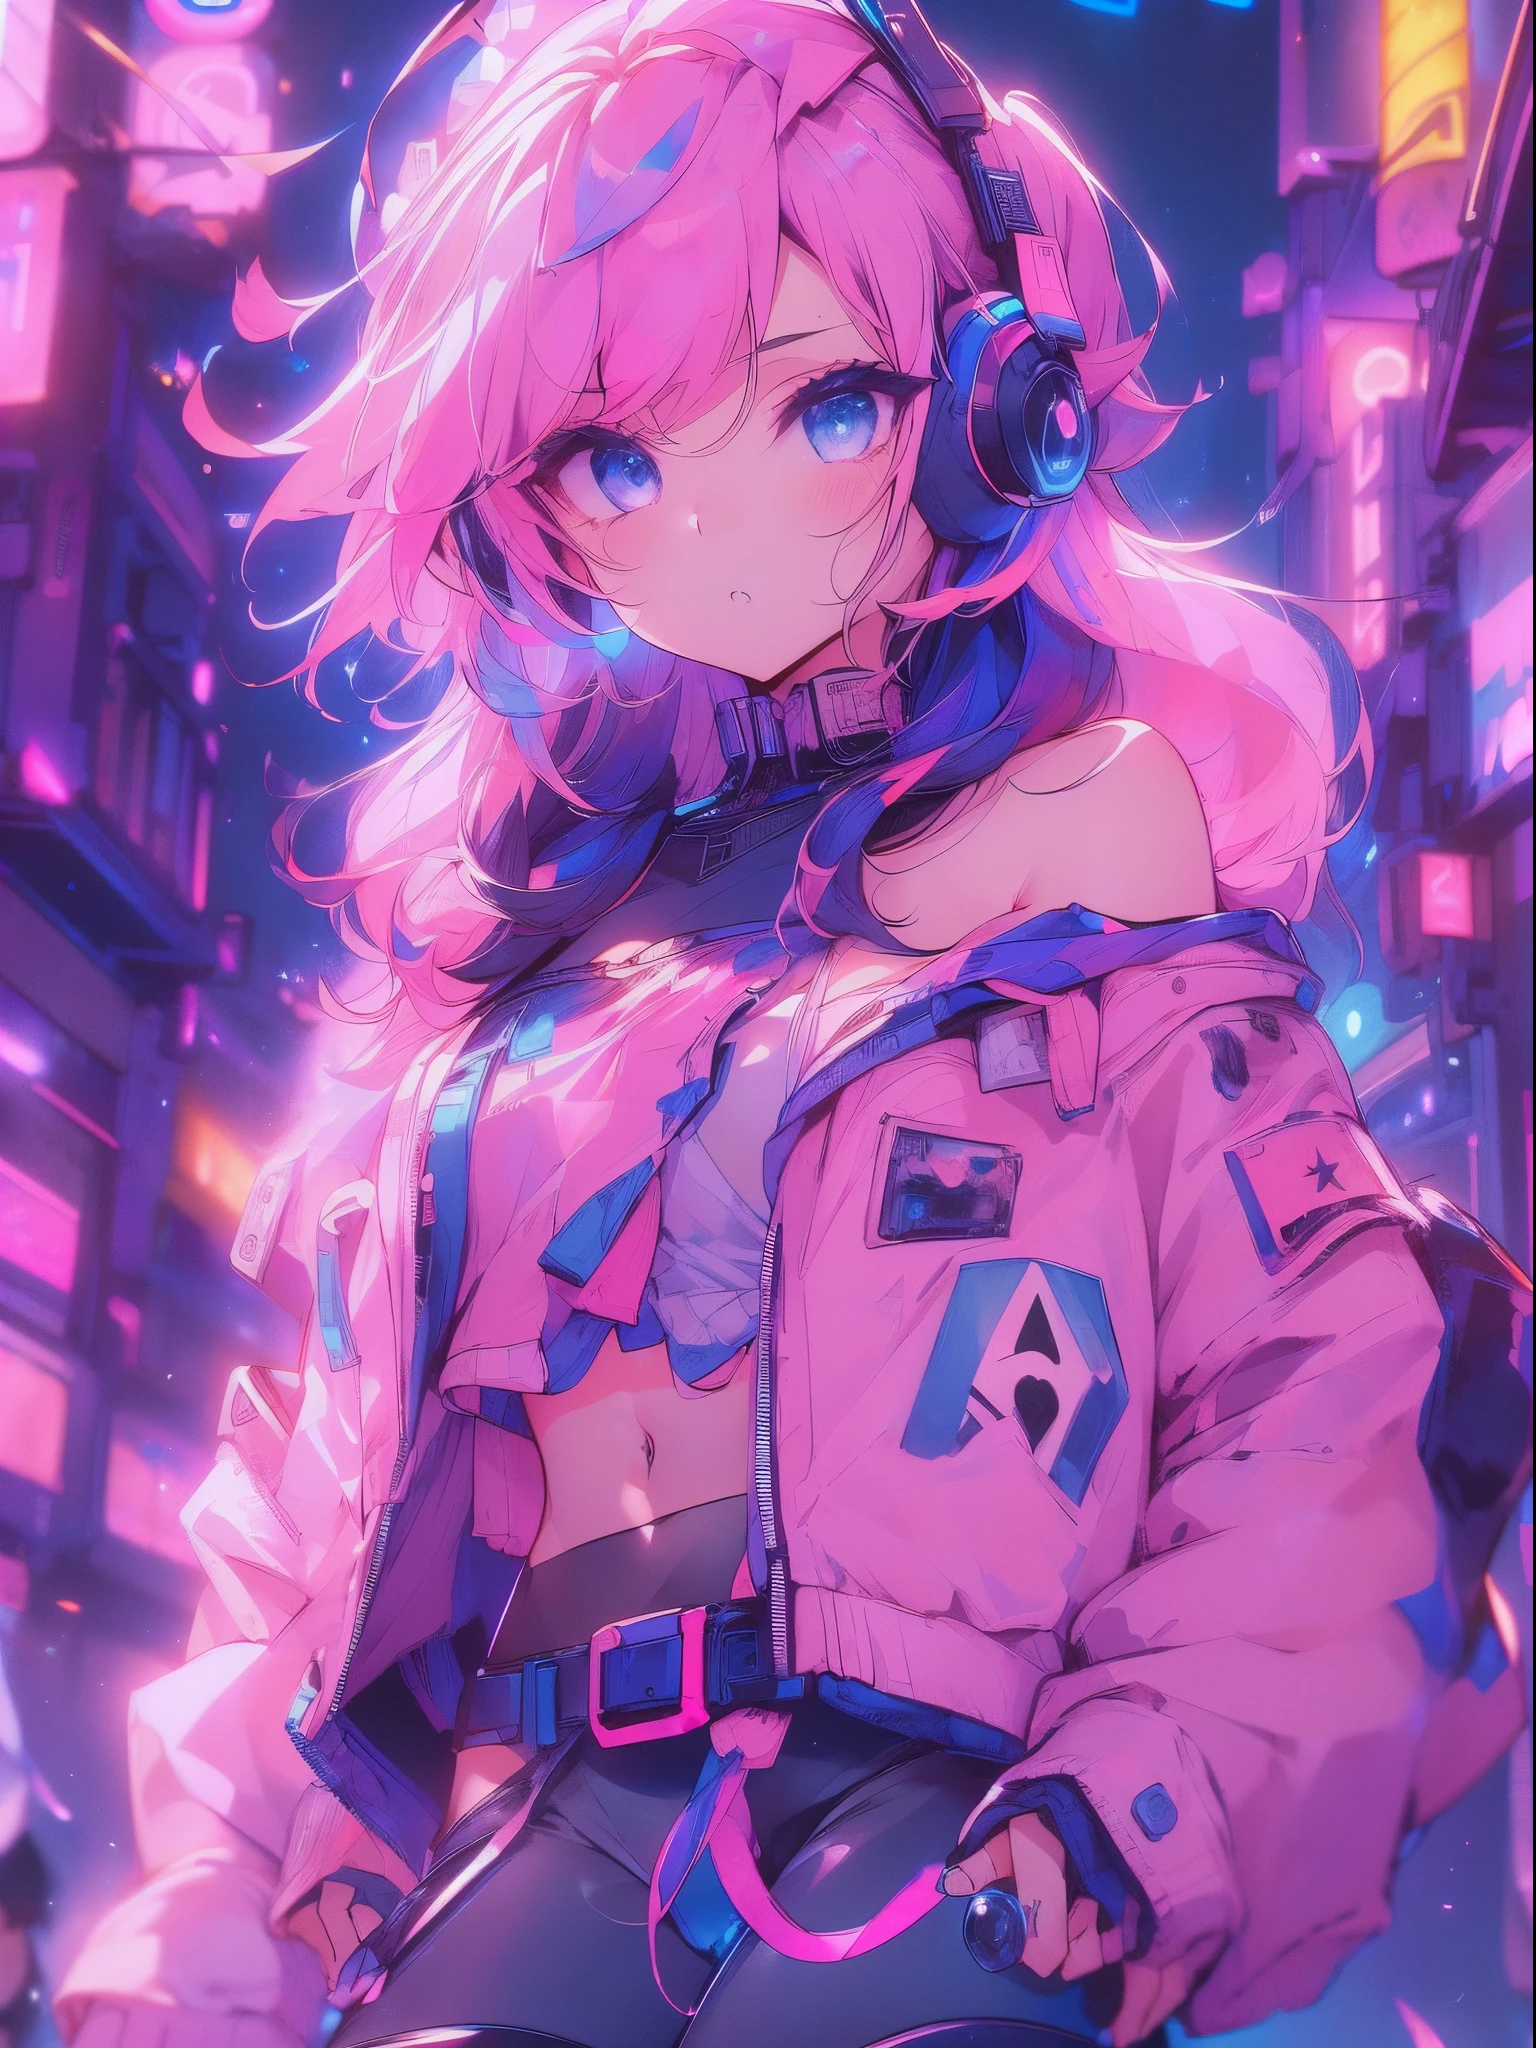 (Best quality, masterpiece:1.4), extremely details 8K unity CG wallpaper, high resolution, (anime style, 2D illustration), 1 girl, (cyberpunk impact), bad girl, ((pink Eye shadow)), (Expressionless), (Earmuffs:1.2), ((pink hair|blue hair|bob hair)), ((ahoge)), blue lipstick, poke face, ((White and purple Y2K jacket, off shoulder take off jacket on arms)), ((white camisole)), (navel:1.3), (black shorts:1.3), (black pantyhose:1.3), Canvas shoes, (((Cowboy shot, from below))), body face to viewer, walking at the street, model pose, BREAK (Perspective:1.3), Details street background, American street, (midnight:1.4), (blue and pink Neon lights:1.5)), (black sky:1.3), pink theme,